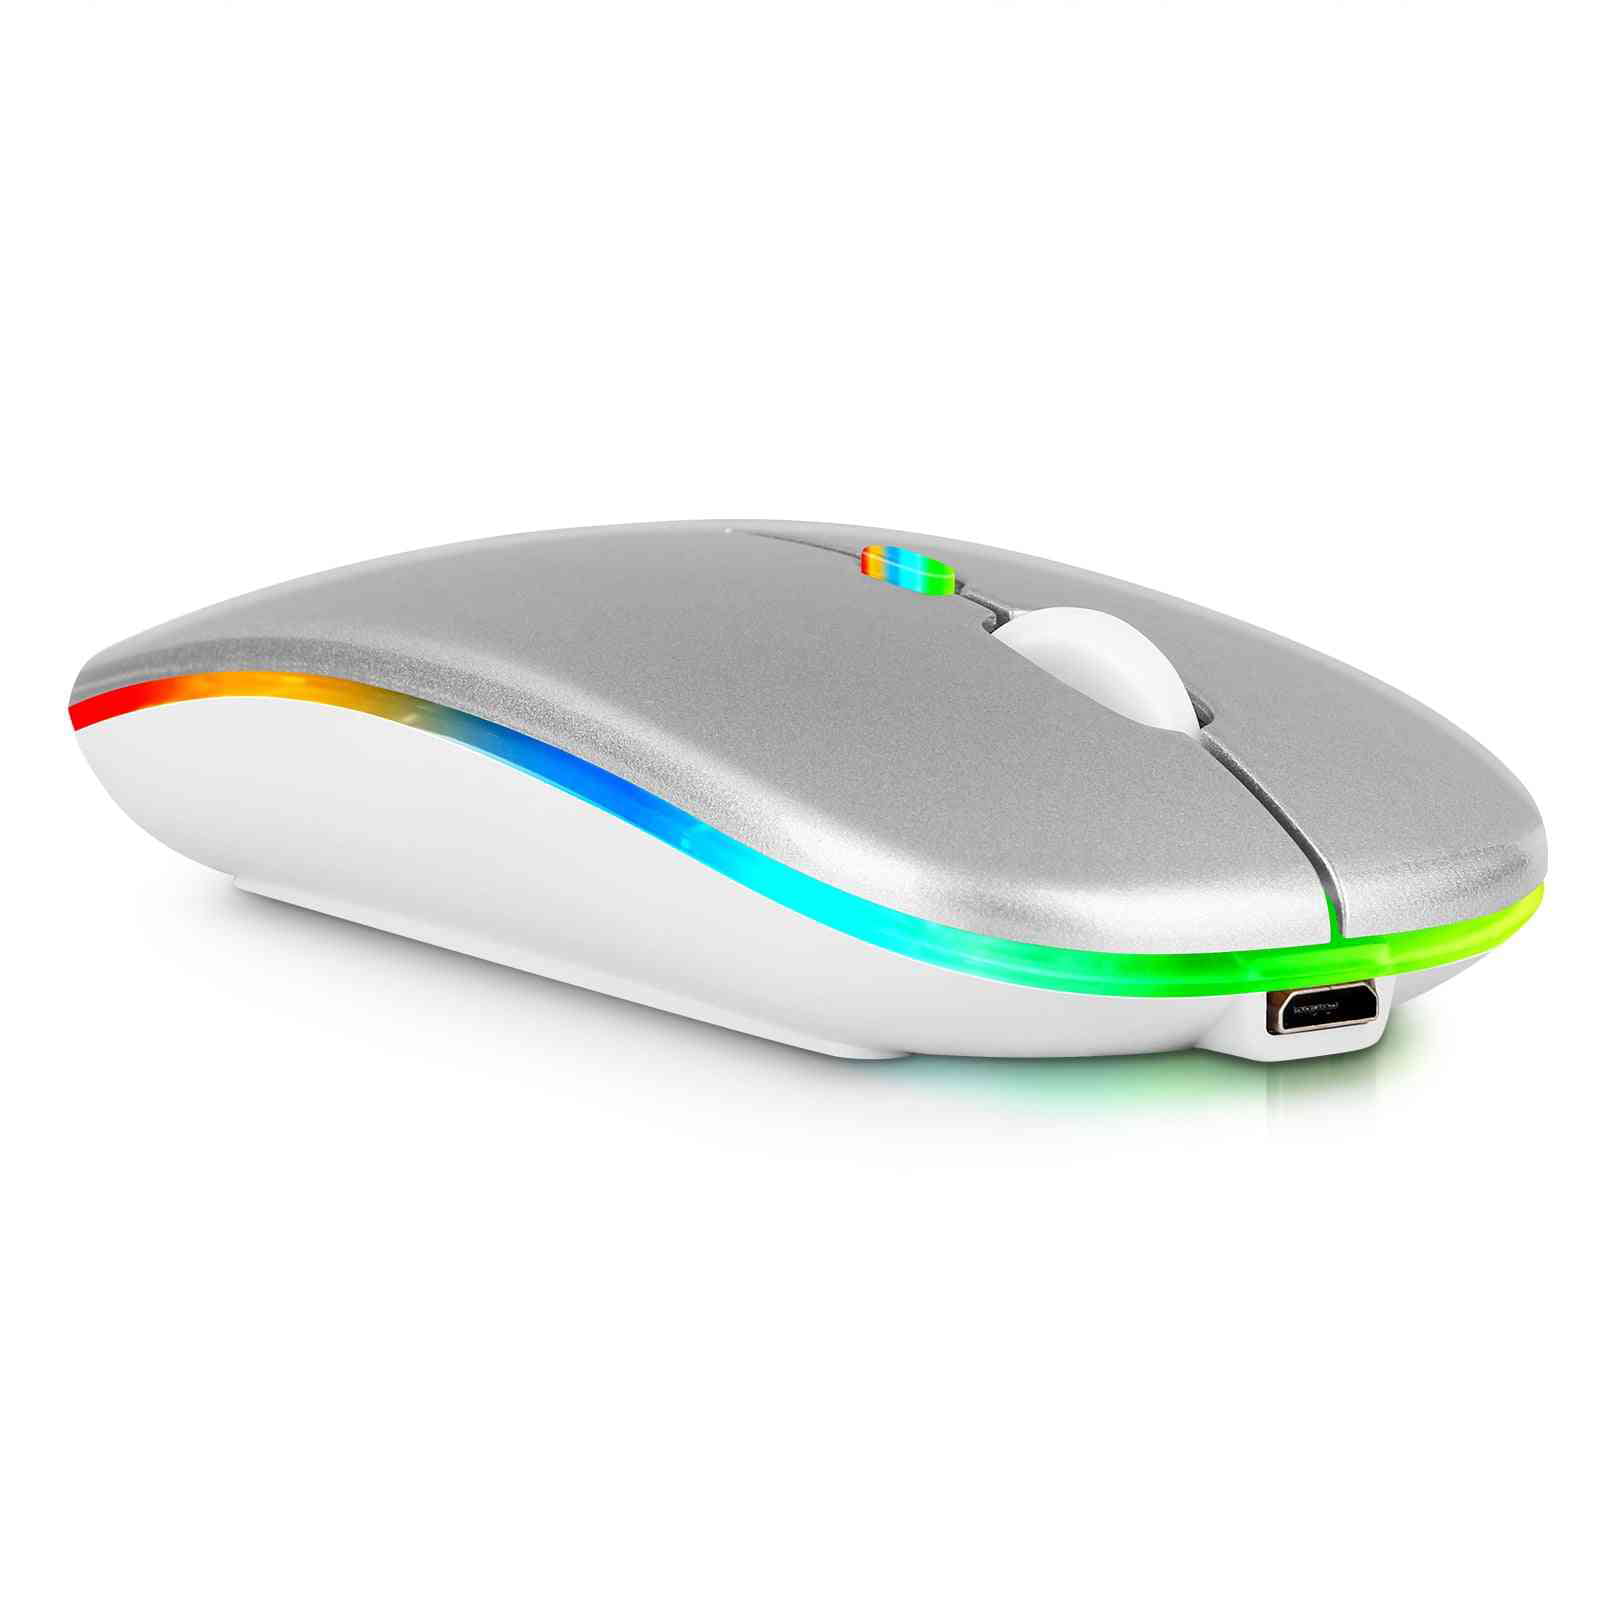 2.4GHz & Bluetooth Mouse, Rechargeable Wireless LED Mouse for Lenovo Tab  P11 Pro Gen 2 ALso Compatible with TV / Laptop / PC / Mac / iPad pro /